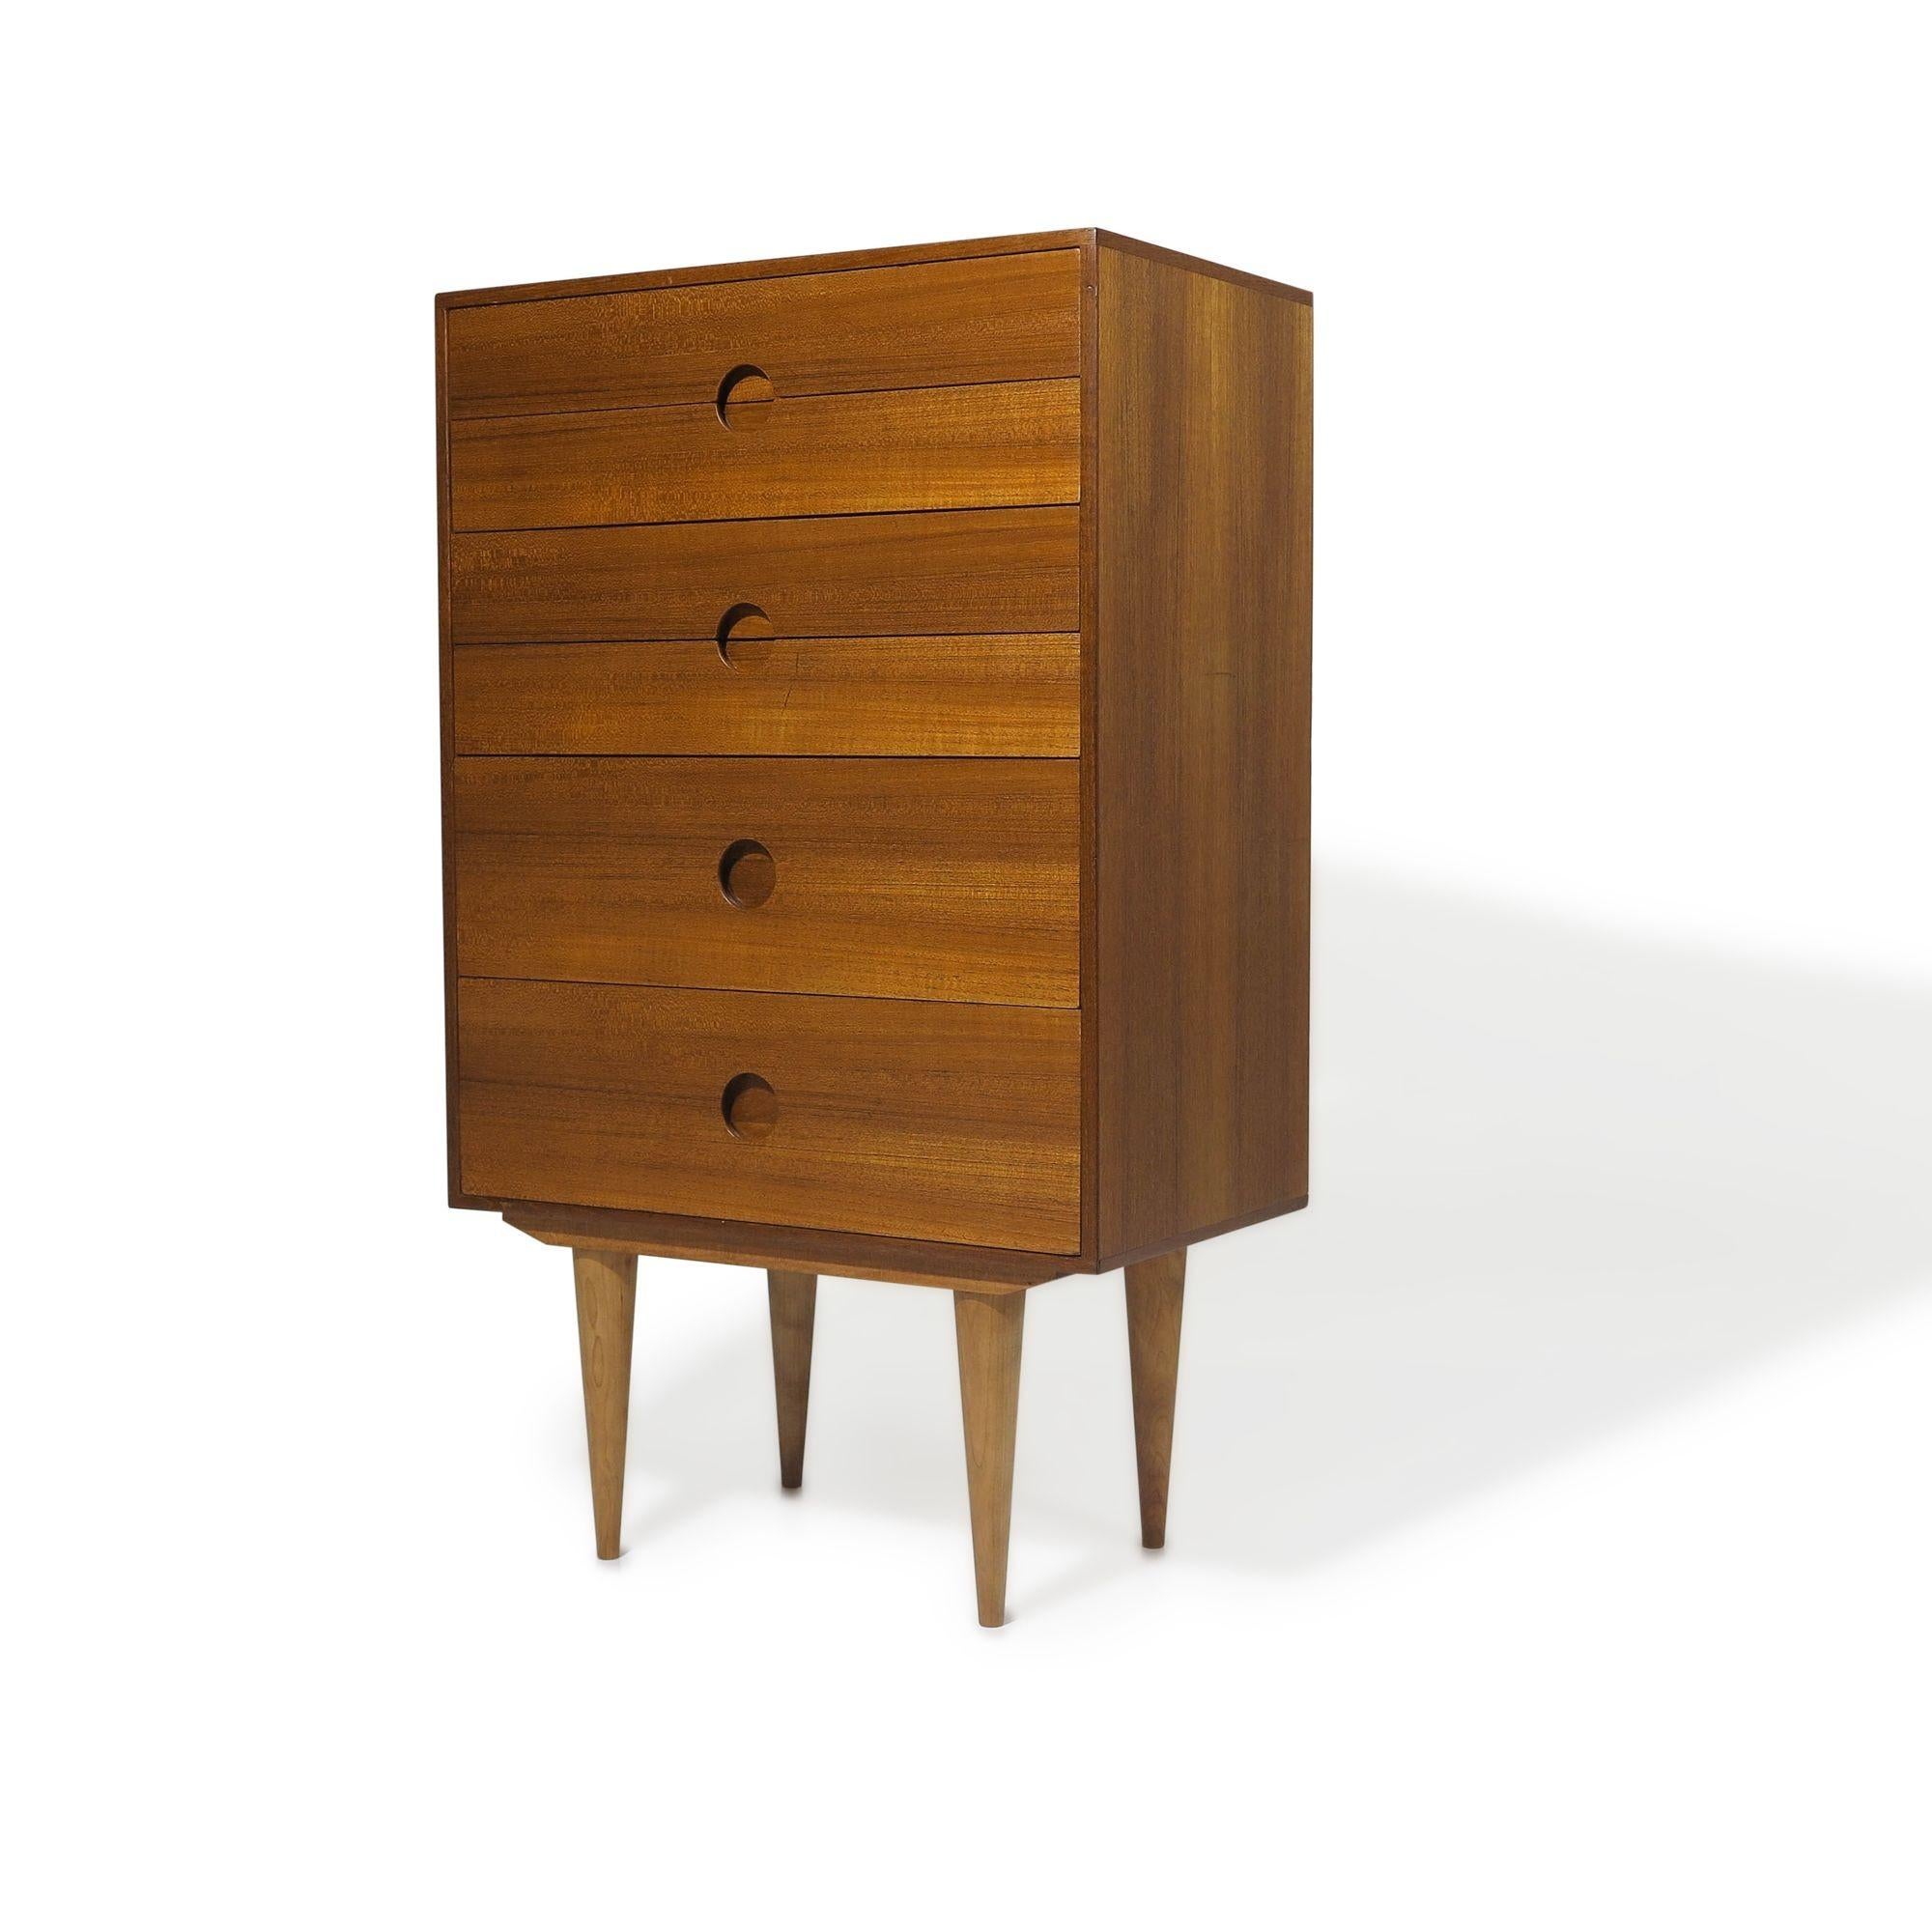 1960s Kai Kristiansen teak dresser with mitered edges, recessed round pulls, and raised on tapered legs. The cabinet has been fully restored with a hand-rubbed natural oil finish. It is in excellent condition with minor signs of age-appropriate